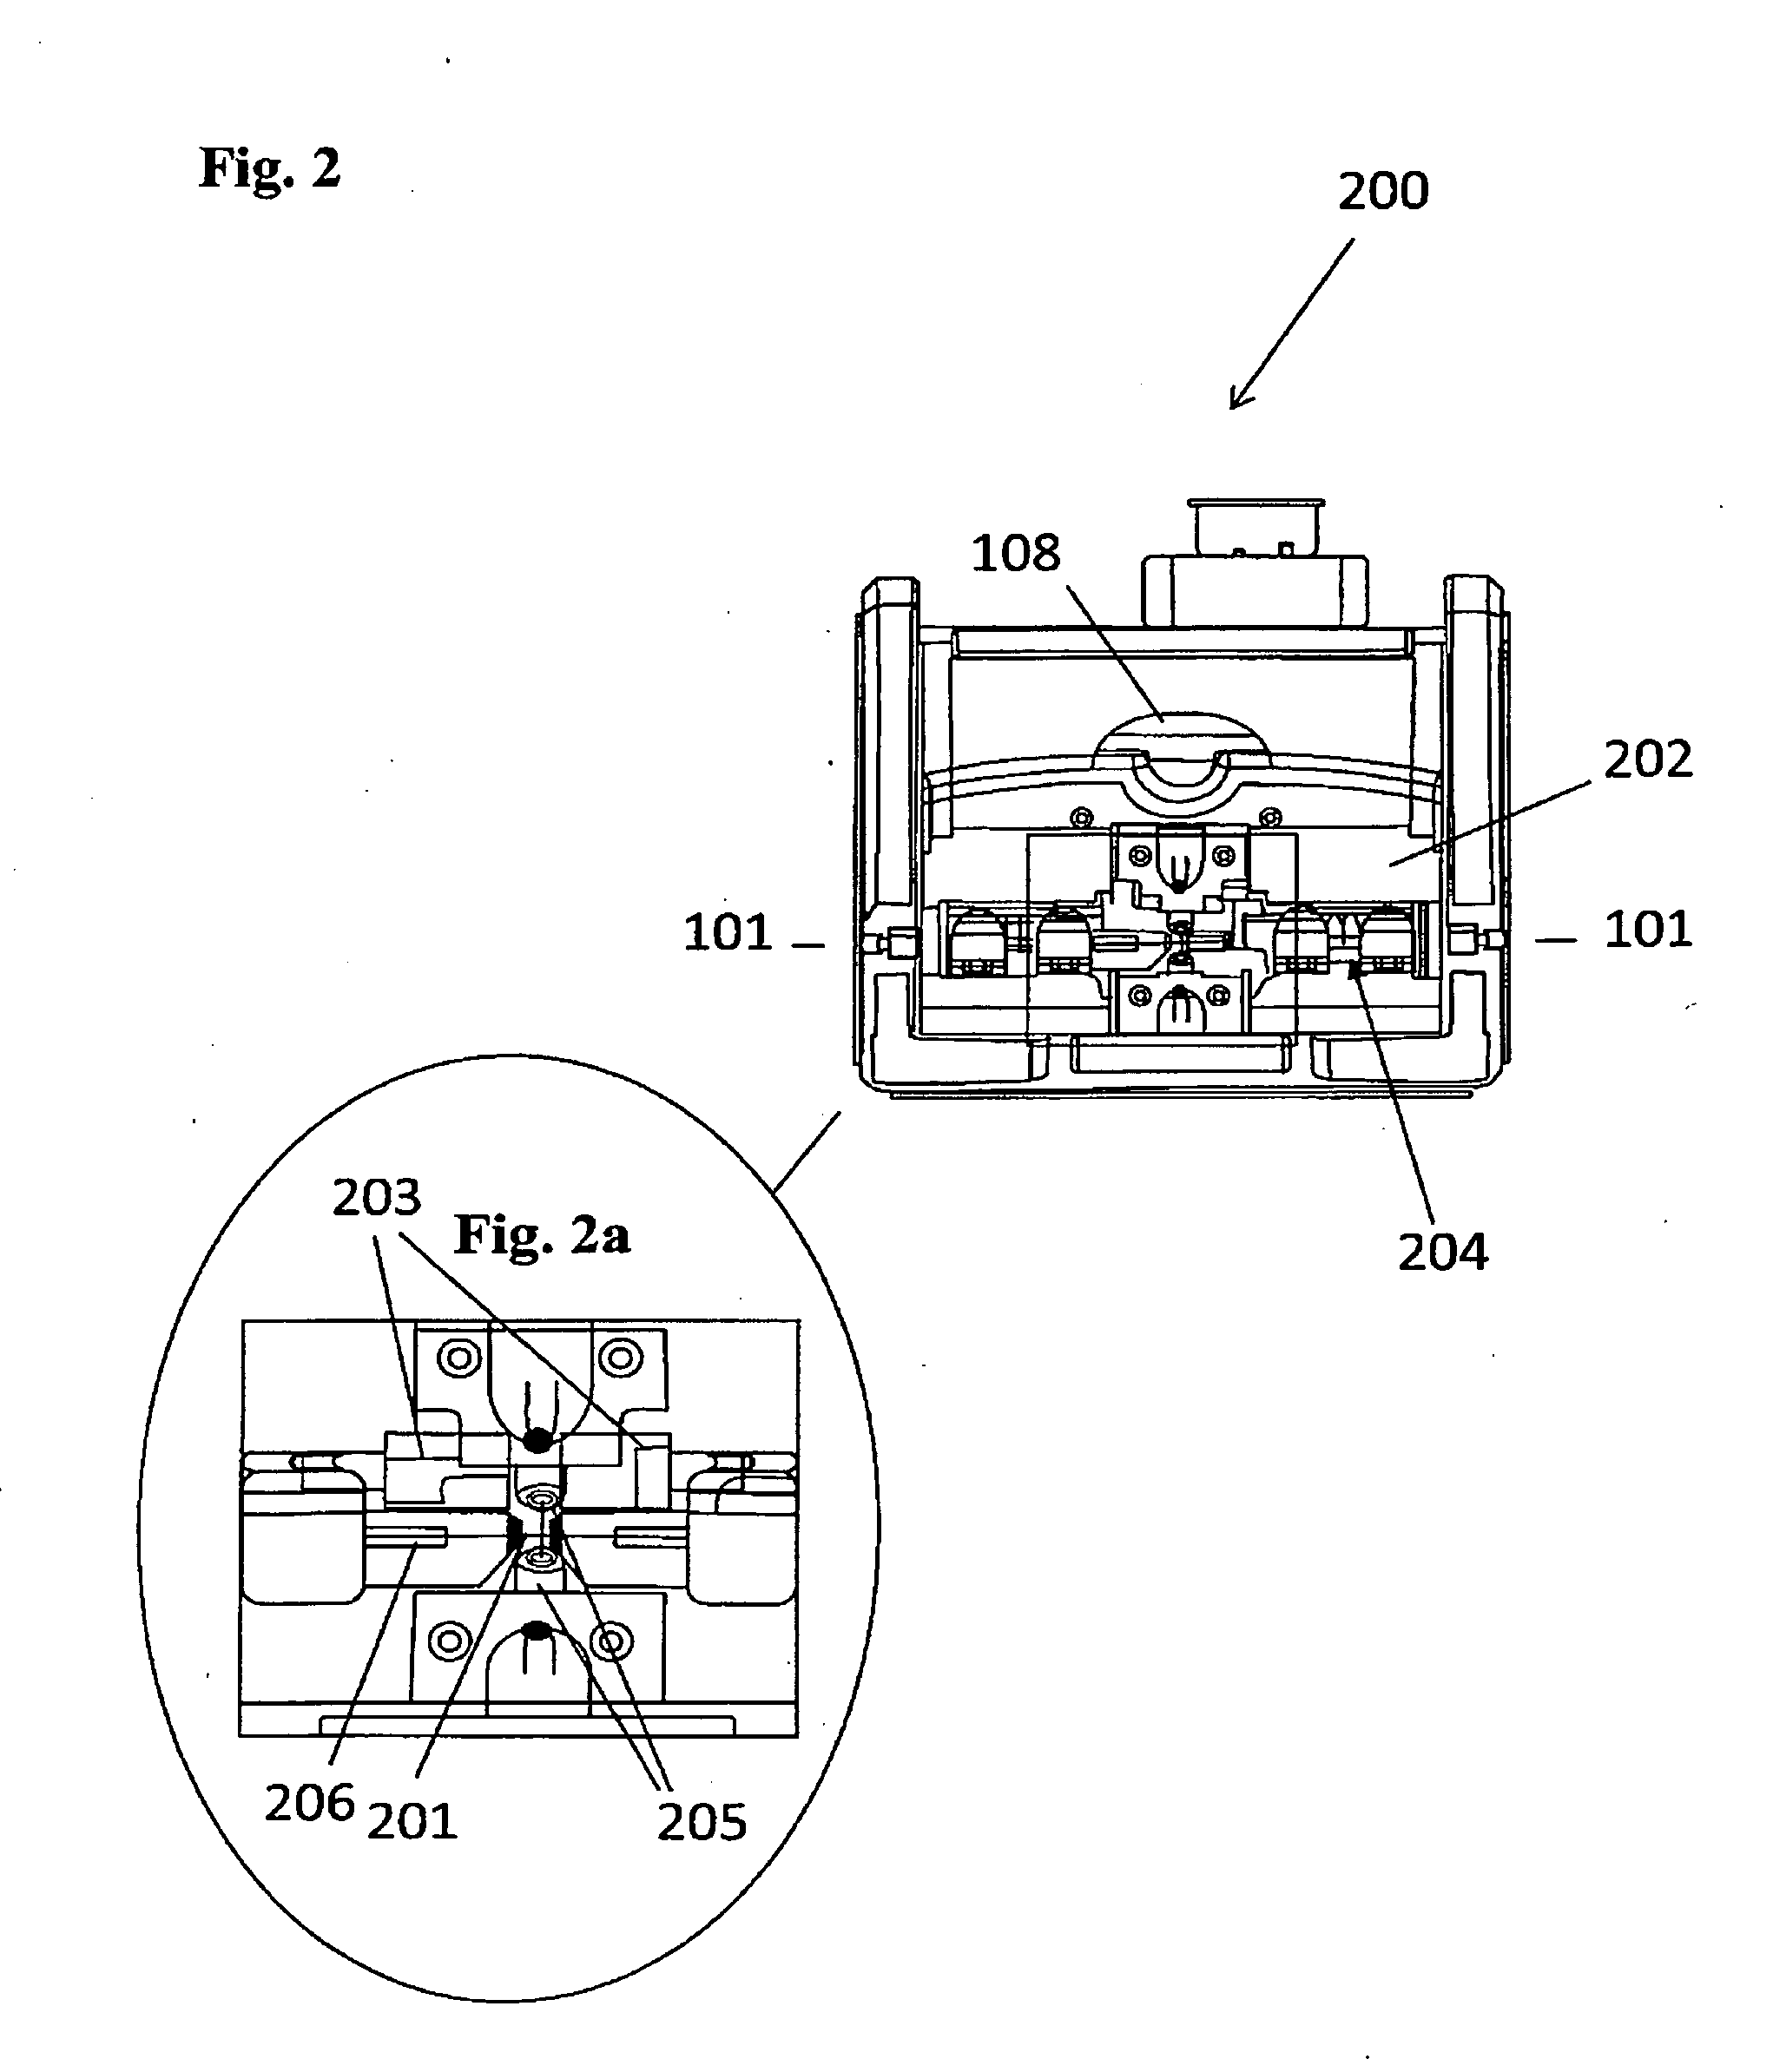 Explosion proof fusion splicer for optical fibers